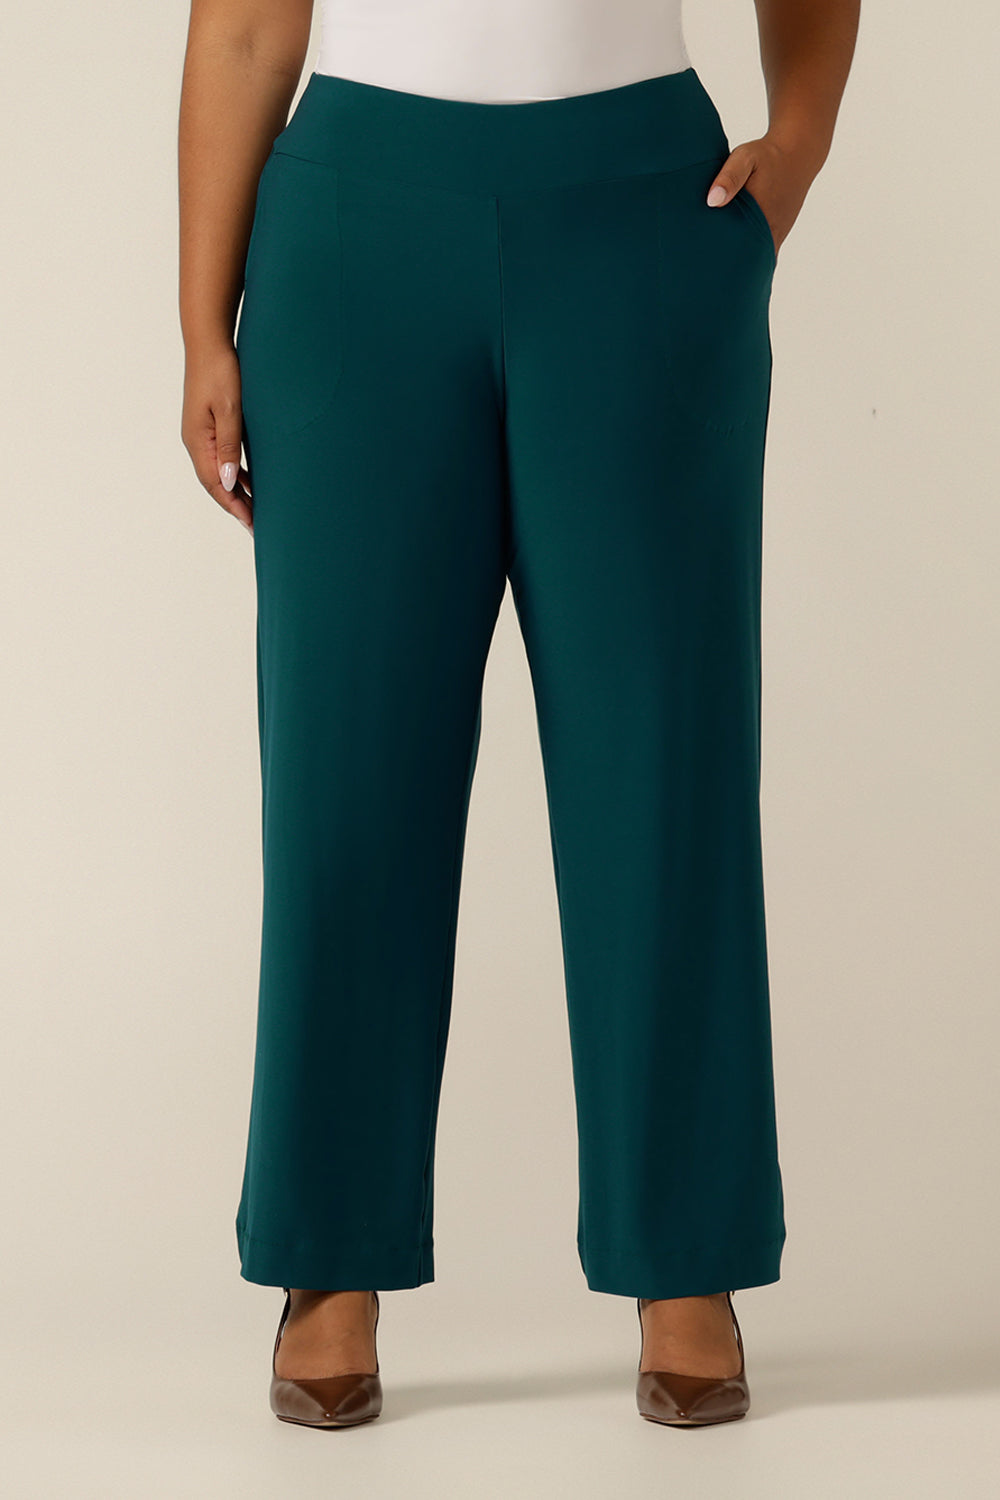 A close up of an Australian-made wide leg, full length petrol green jersey pant in plus size, size 18. By Australian and New Zealand women's fashion brand, L&F these wide leg work pants promise to be a comfortable corporate trouser for sizes 8 to size 24. 